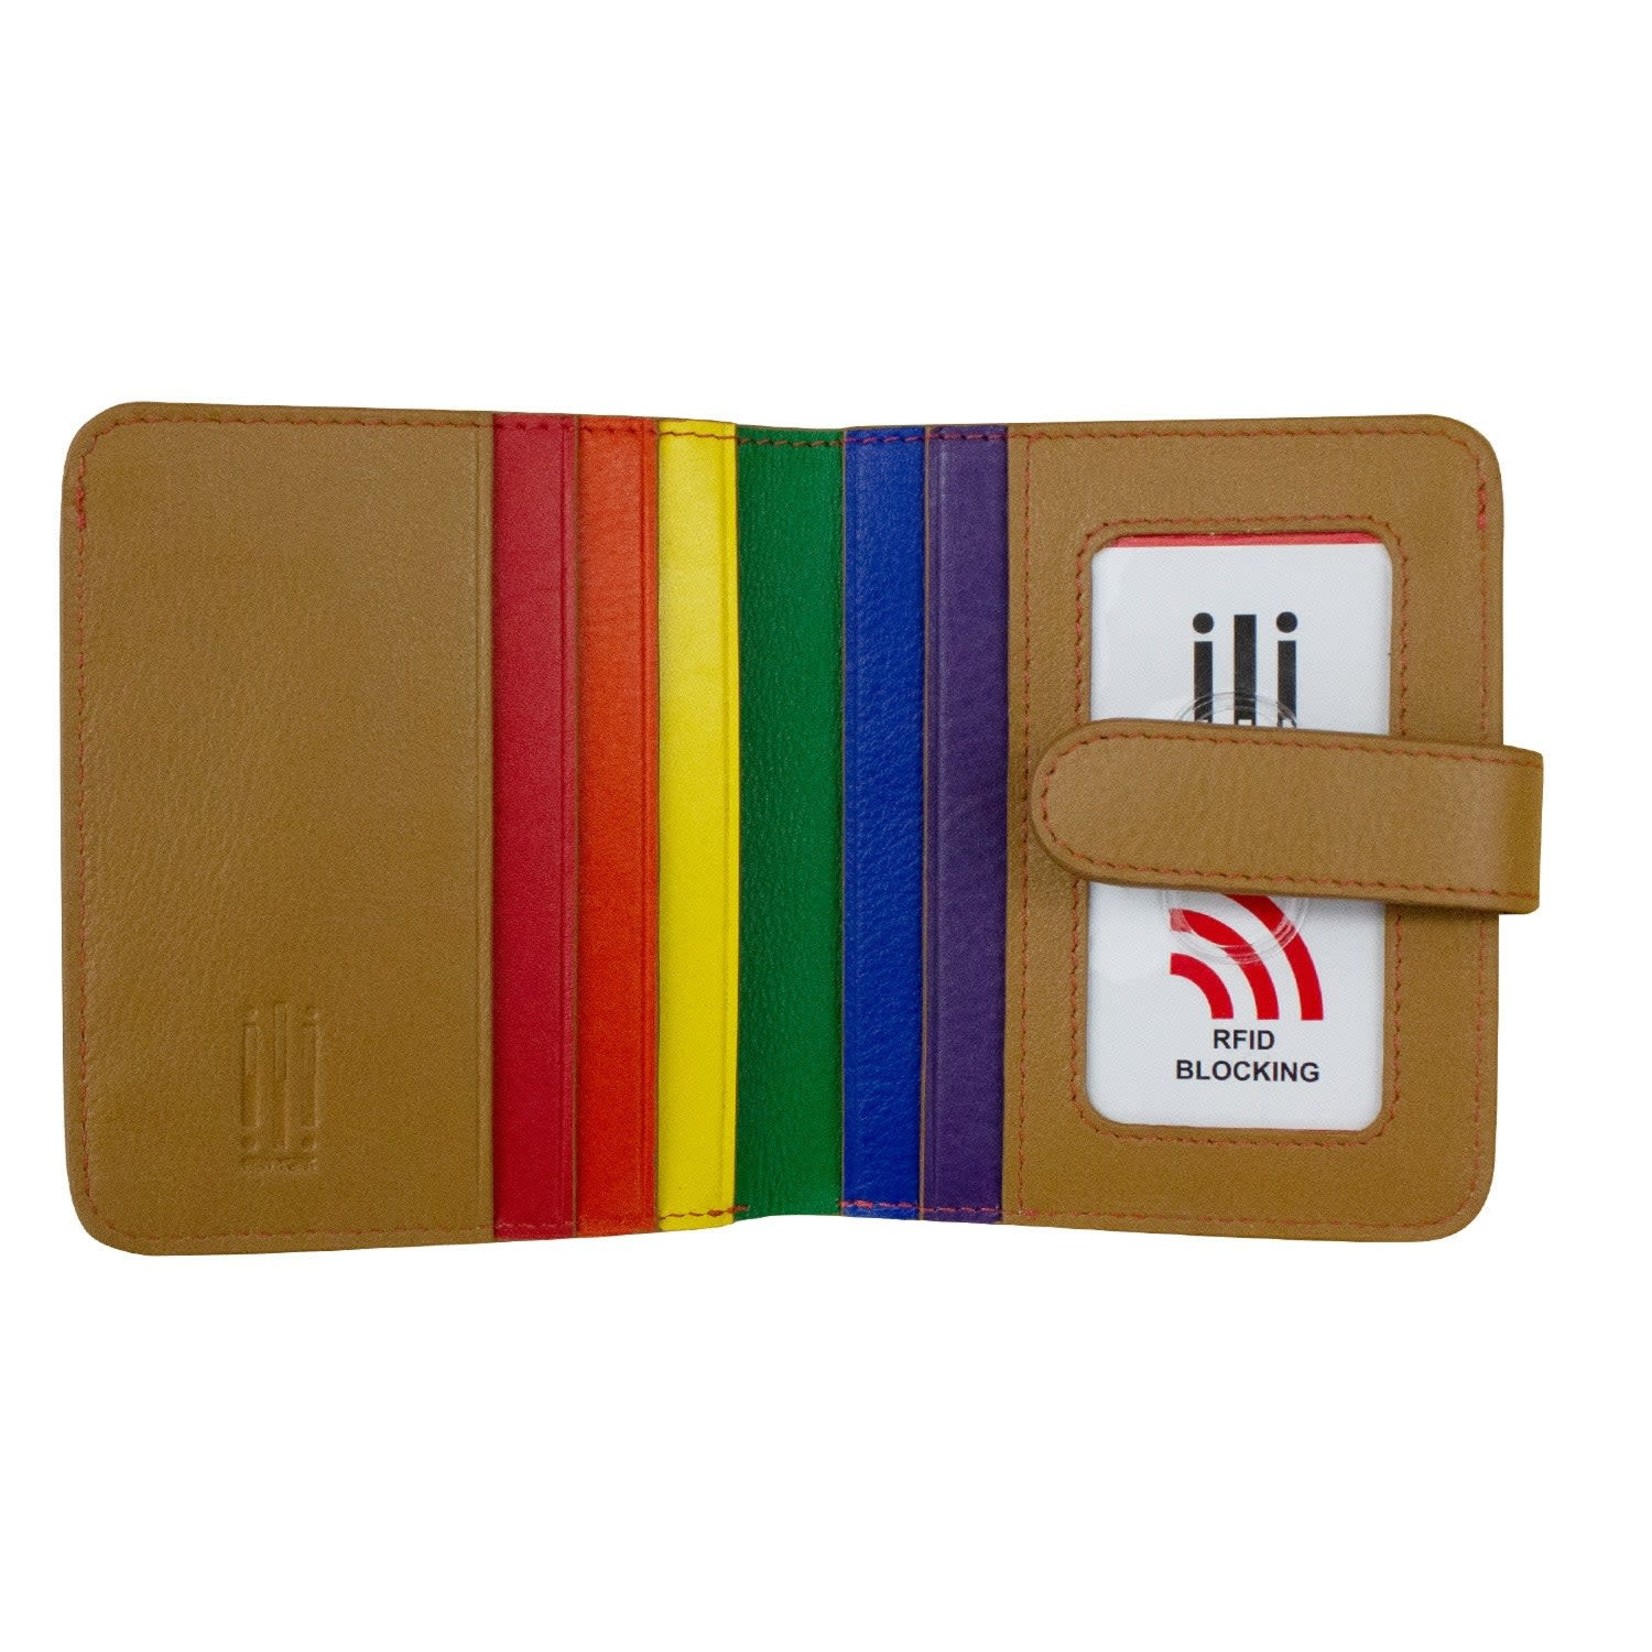 Leather Handbags and Accessories 7301 Rainbow Multi - RFID Small Wallet